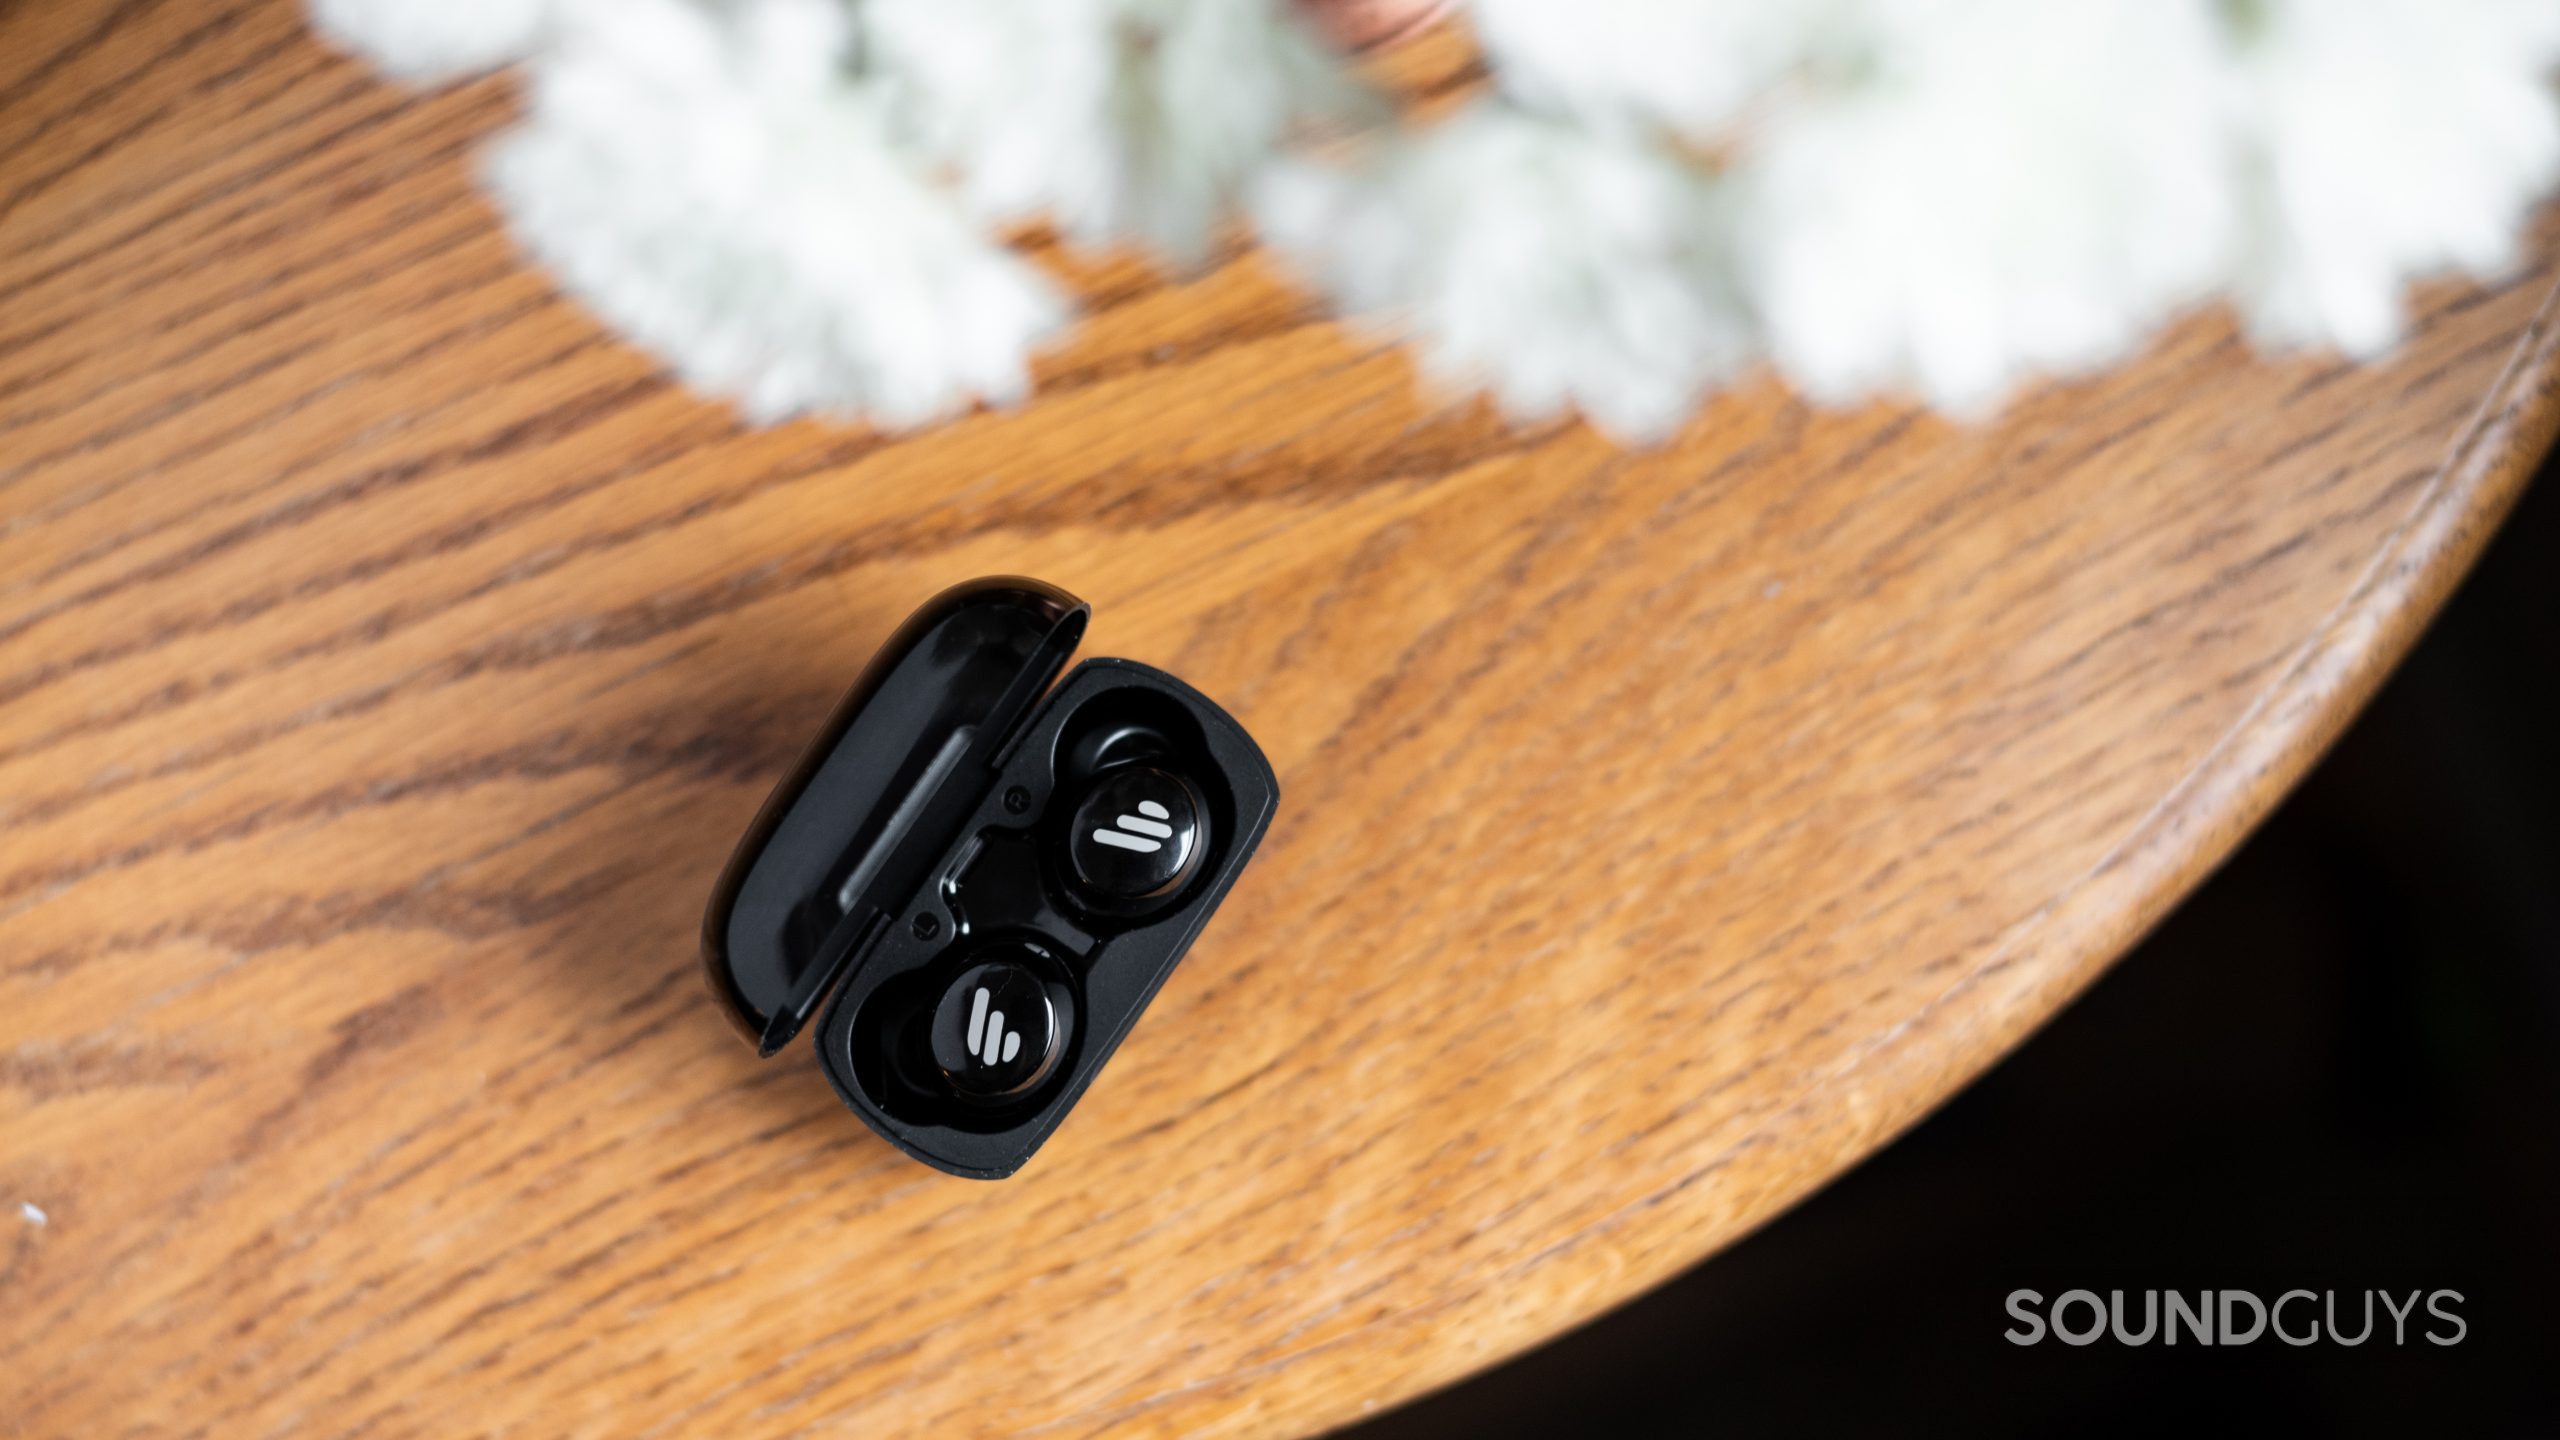 An aerial picture of the Edifier TWS1 true wireless earbuds in the charging case on a wood surface.